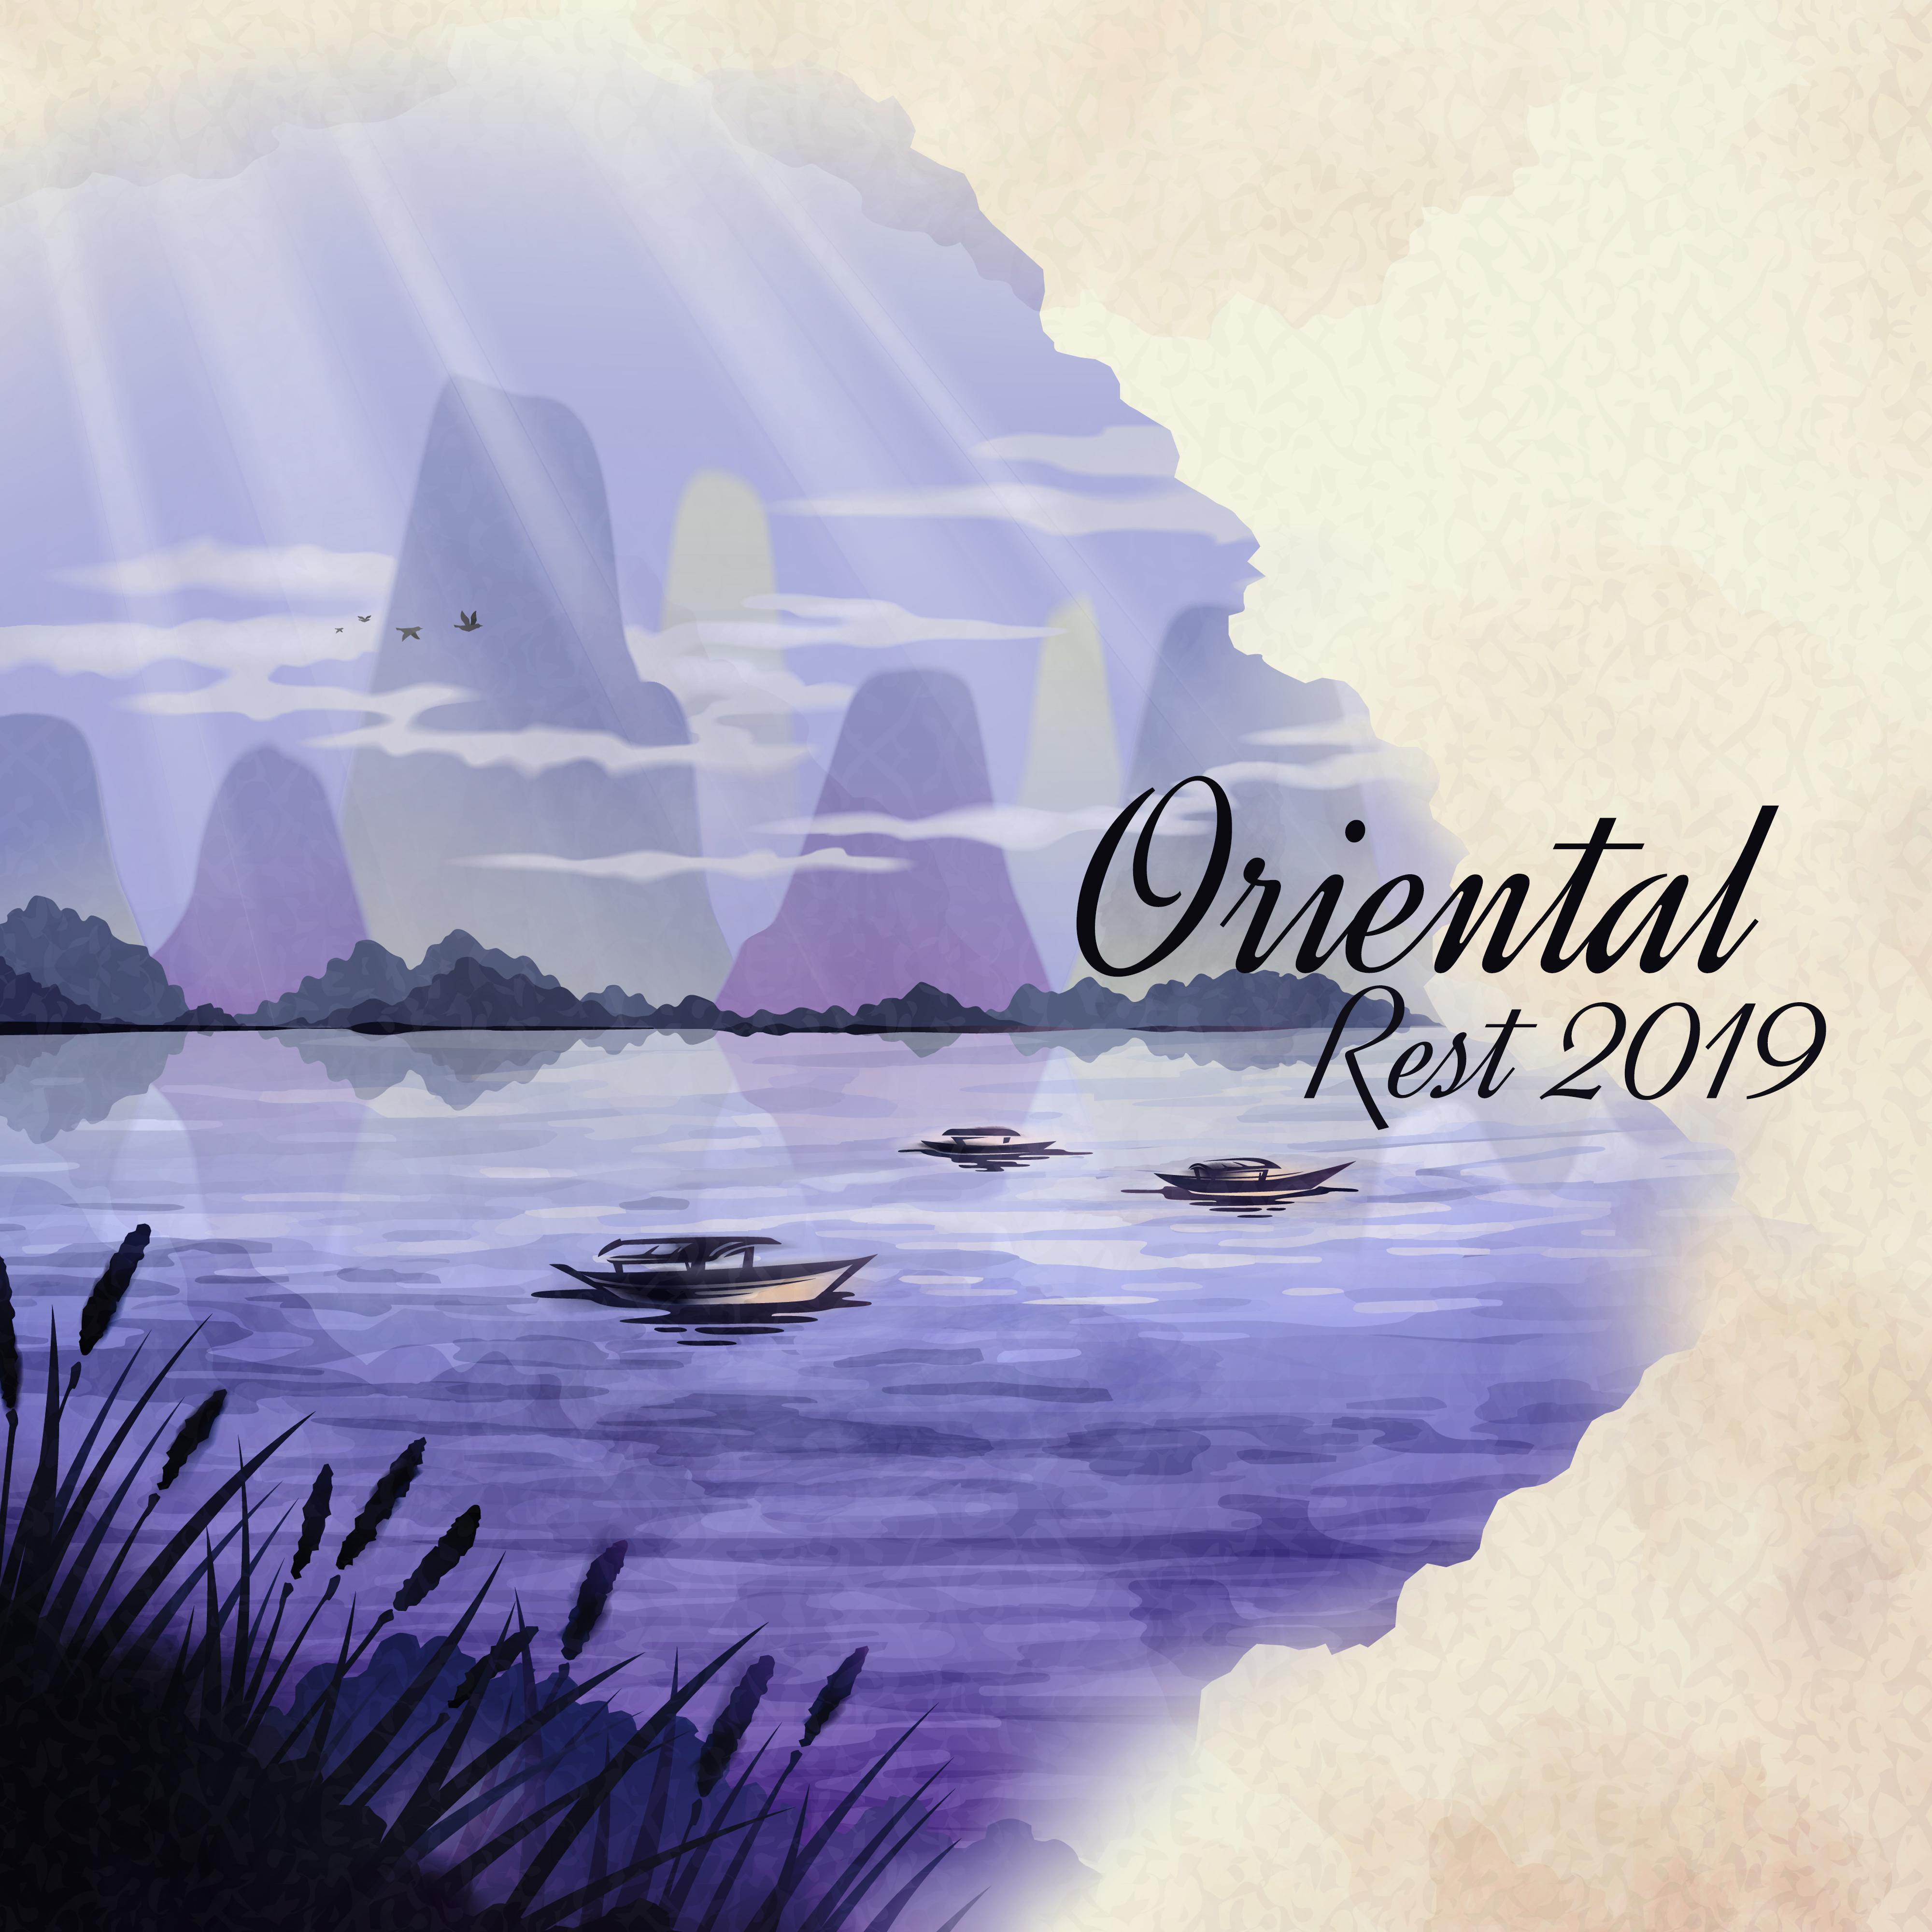 Oriental Rest 2019  Compilation of Deep Relaxation Music, Sleep, Full Calm Down, Stress Relief, Asian, Ambient  Nature Sounds